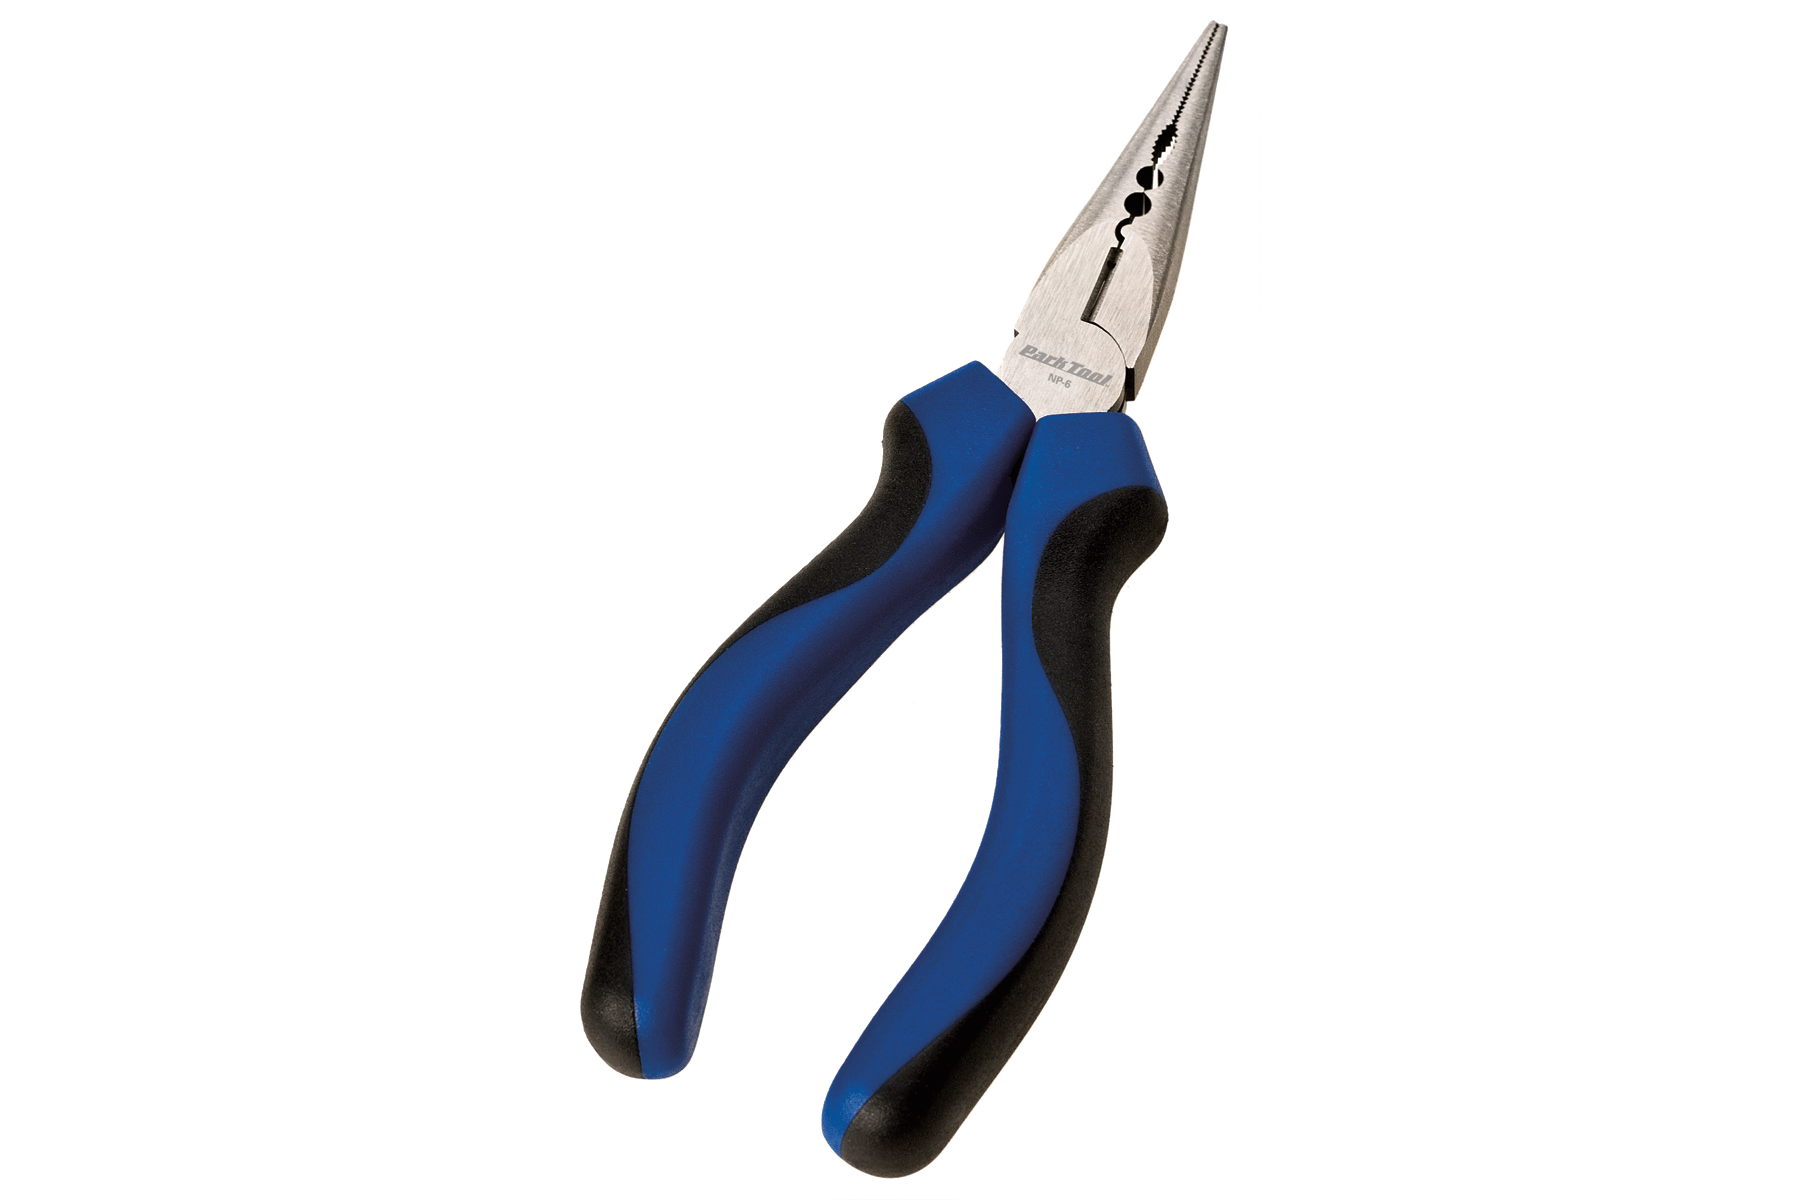 Park Tool NP-1 Needle Nose Pliers